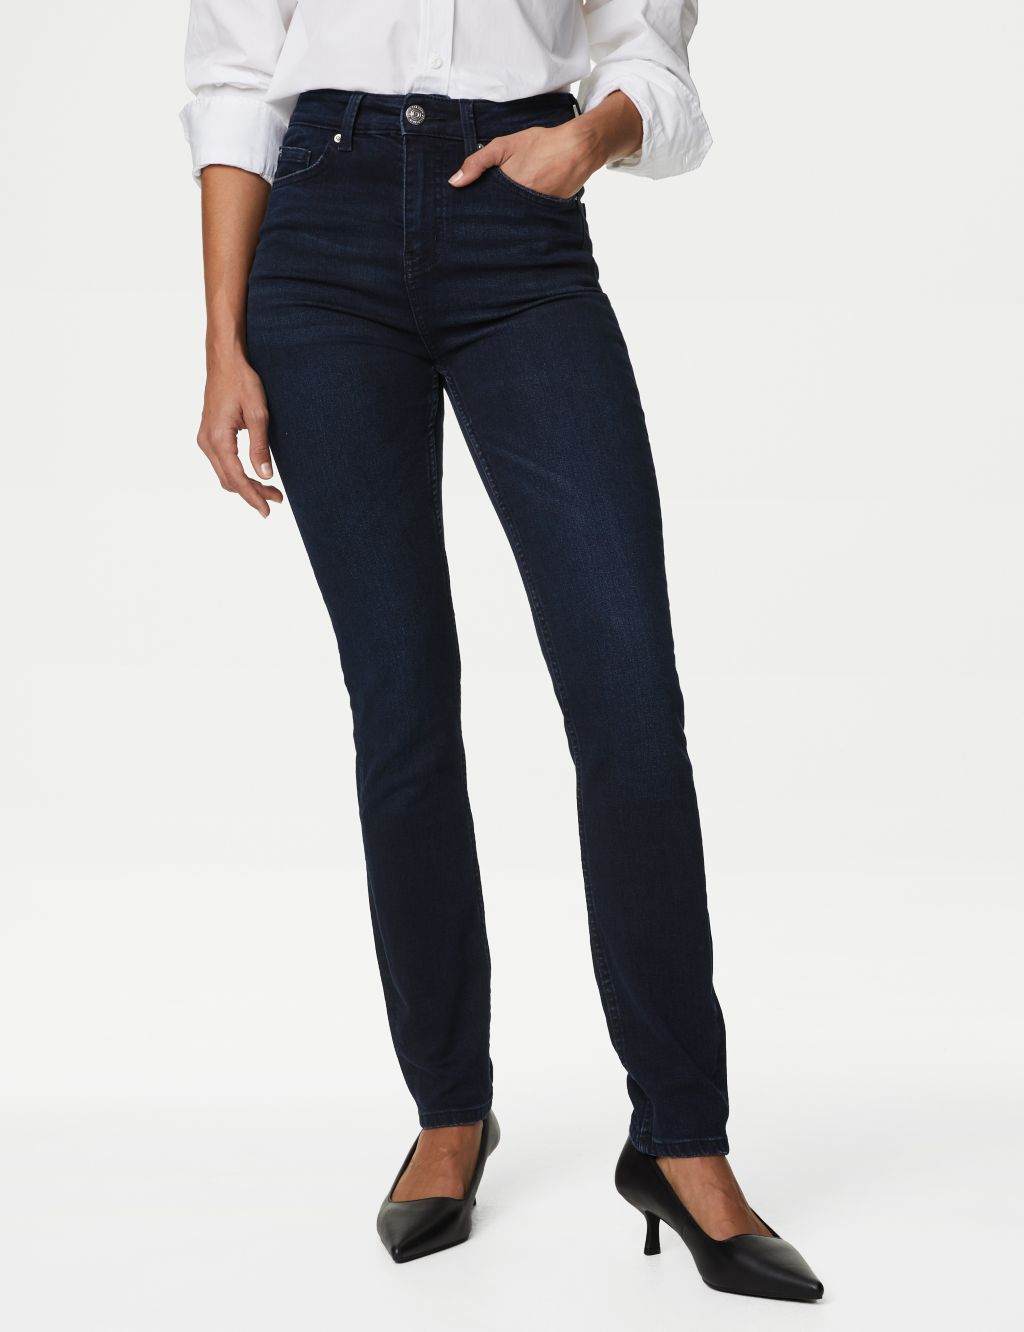 Lily Slim Fit Jeans with Stretch image 1